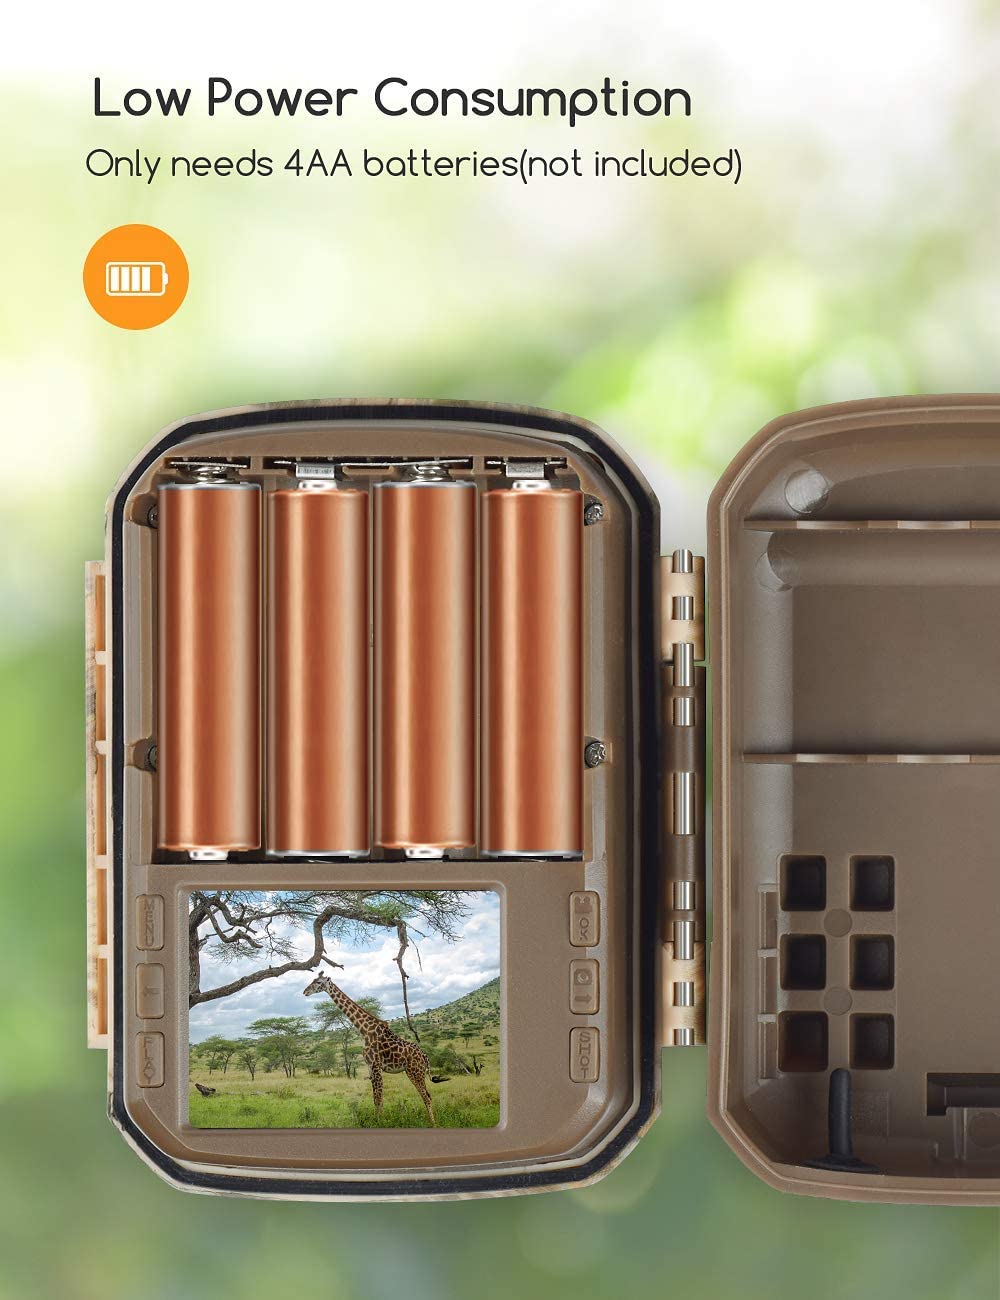 The Campark T21 Trail camera has a long battery life with only 4AA batteries.